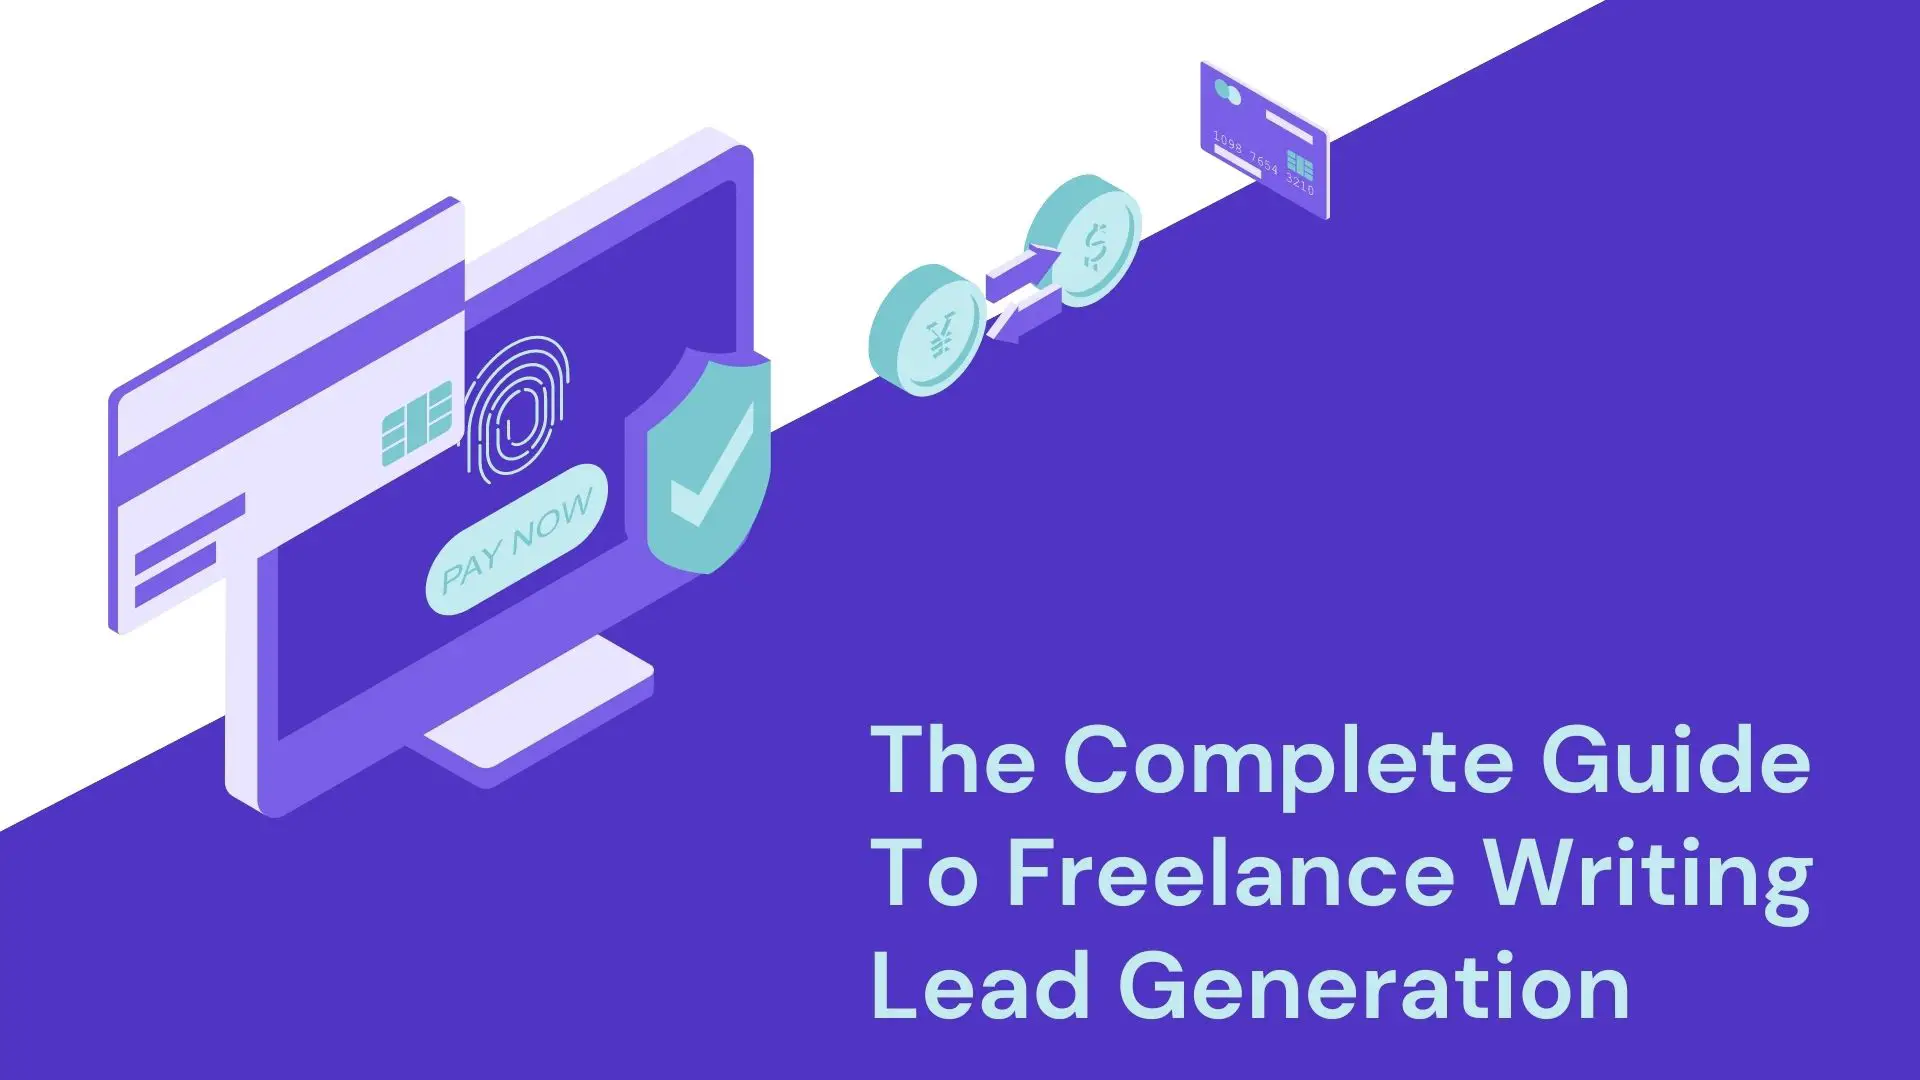 The Complete Guide To Freelance Writing Lead Generation